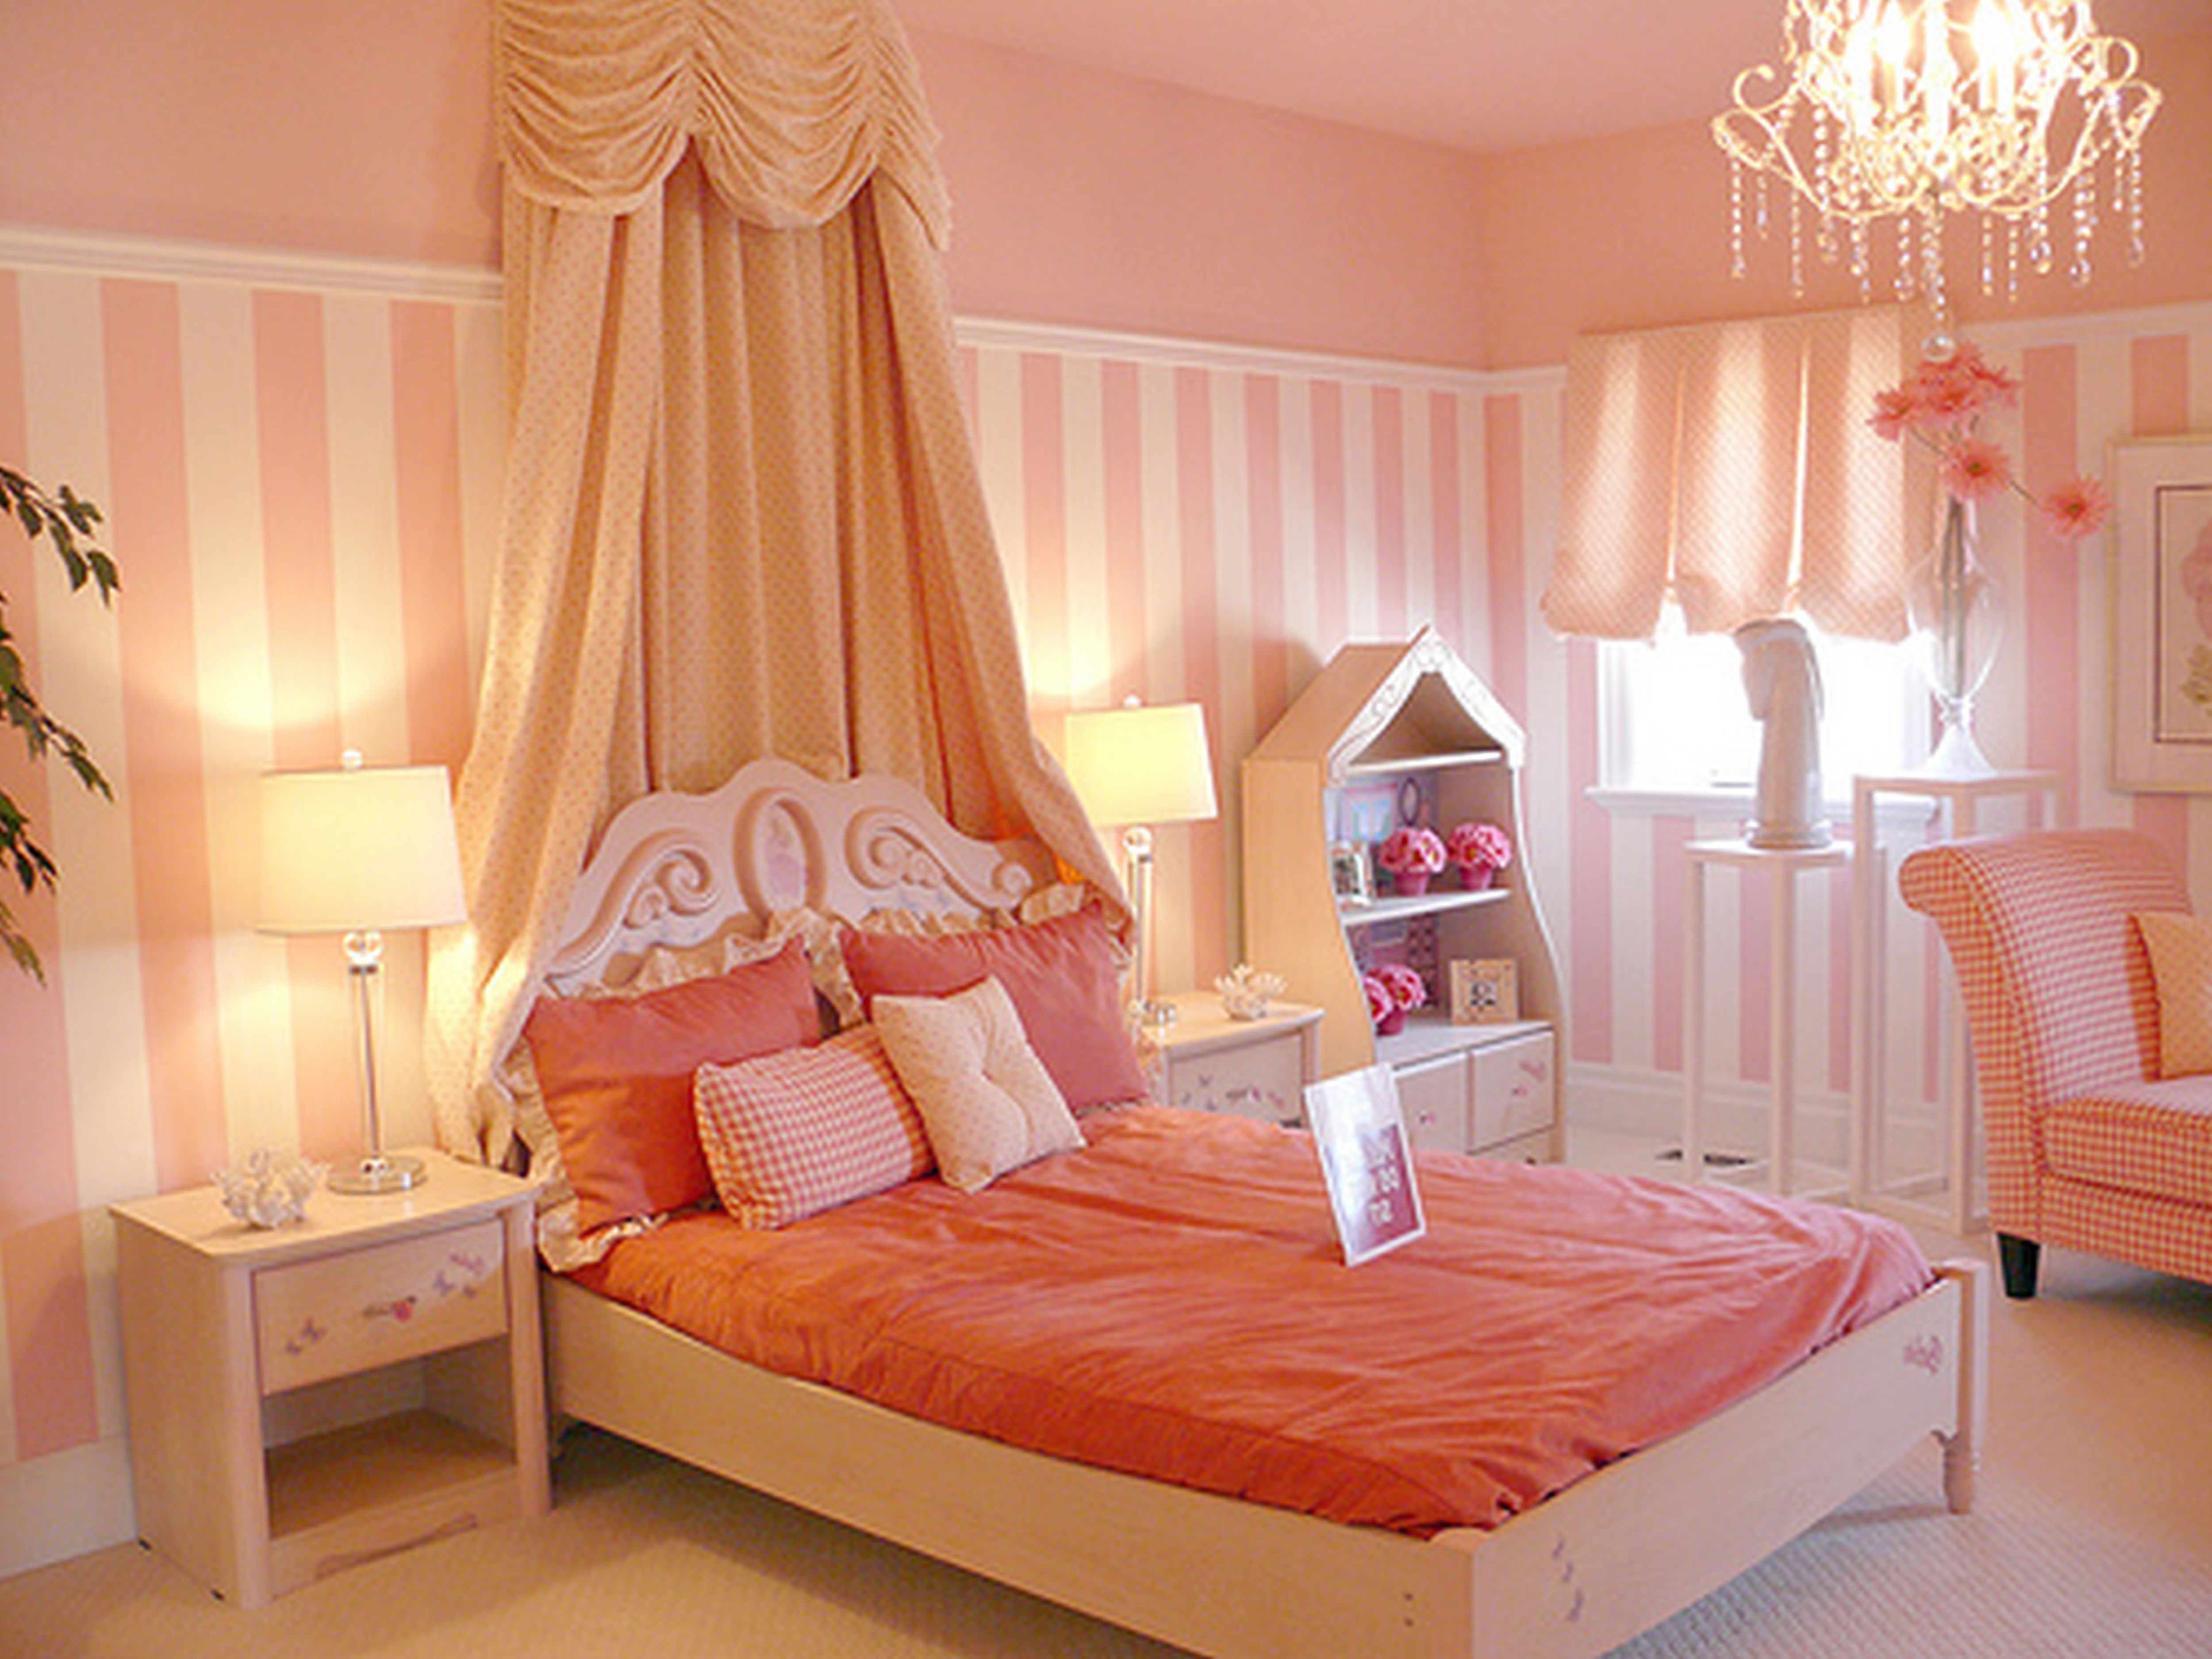 Beauty Teenage Girl Room Colors Home Design Ideas Home Design with sizing 5000 X 3750